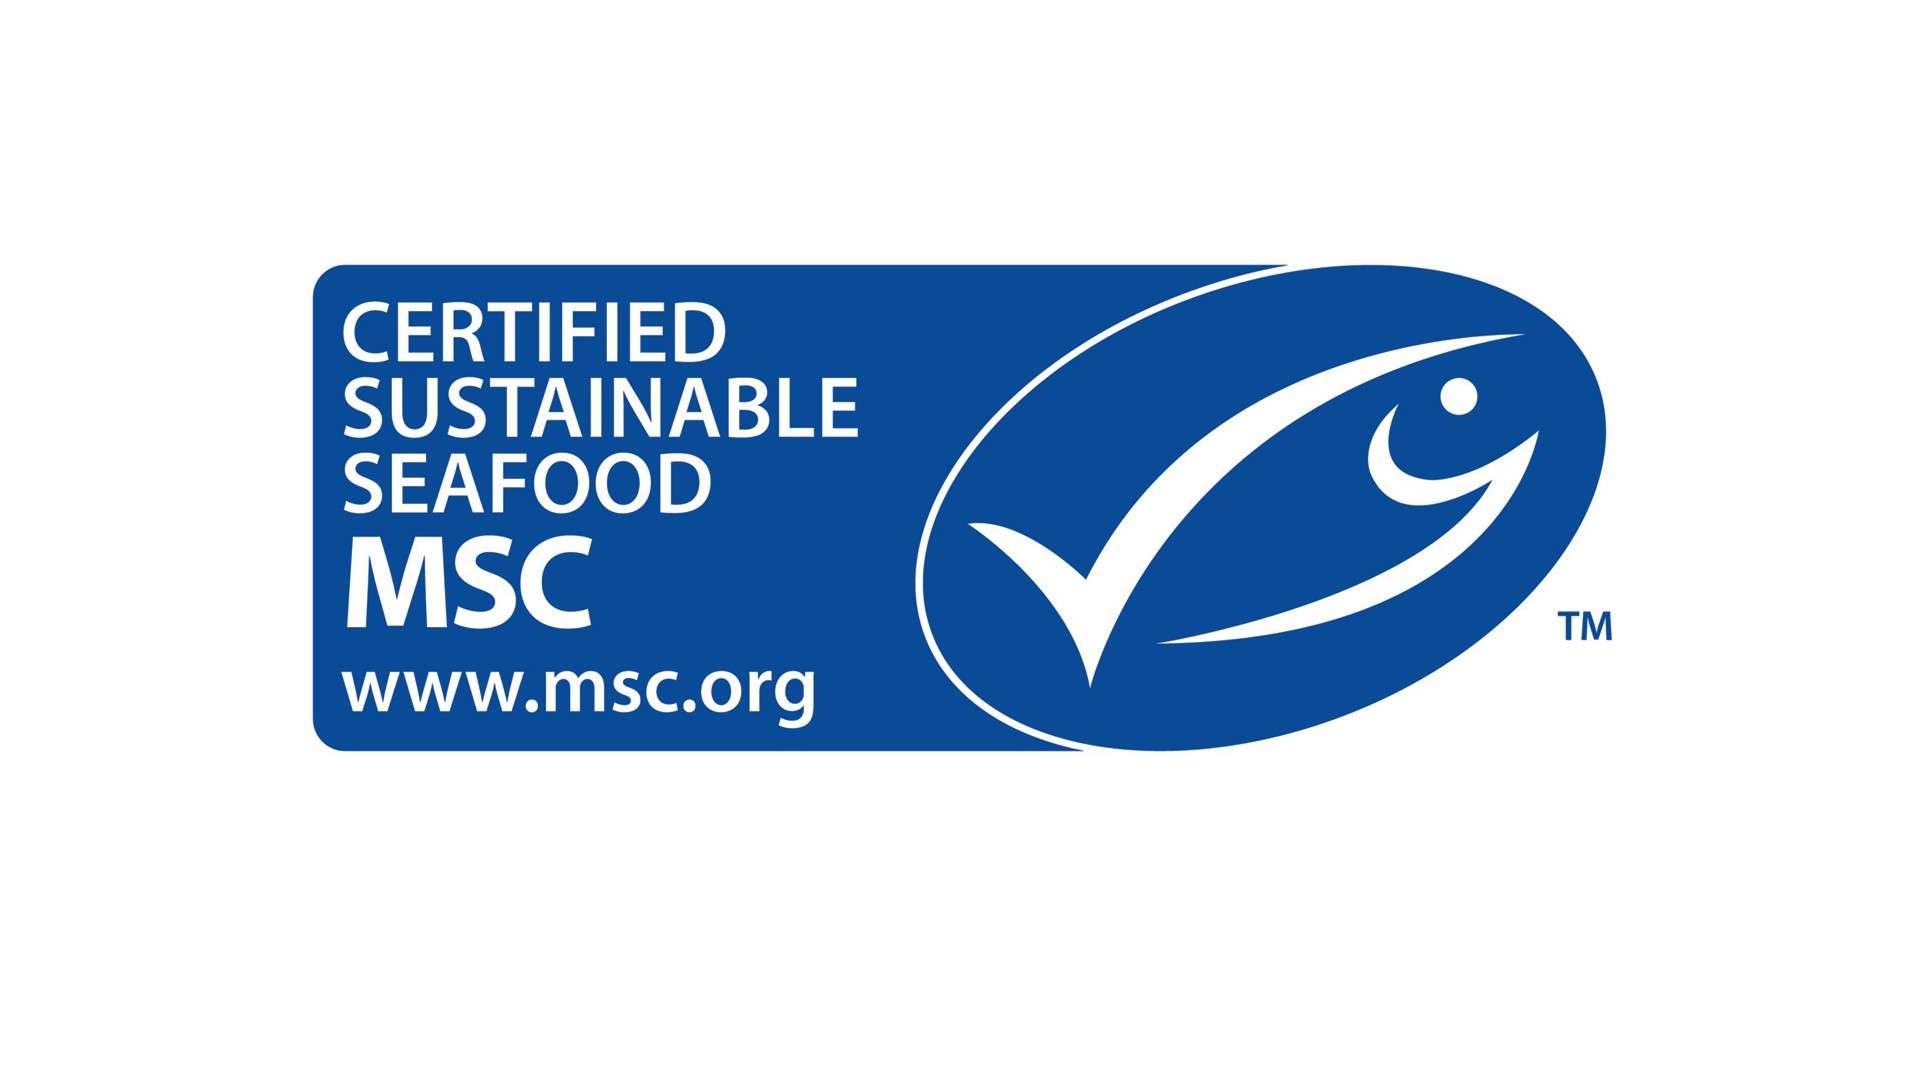 Sustainable seafood Sustainable seafood is either caught or farmed in ways that consider the long-term vitality of harvested species and the well-being of the oceans, as well as the livelihoods of fisheries-dependent communities.